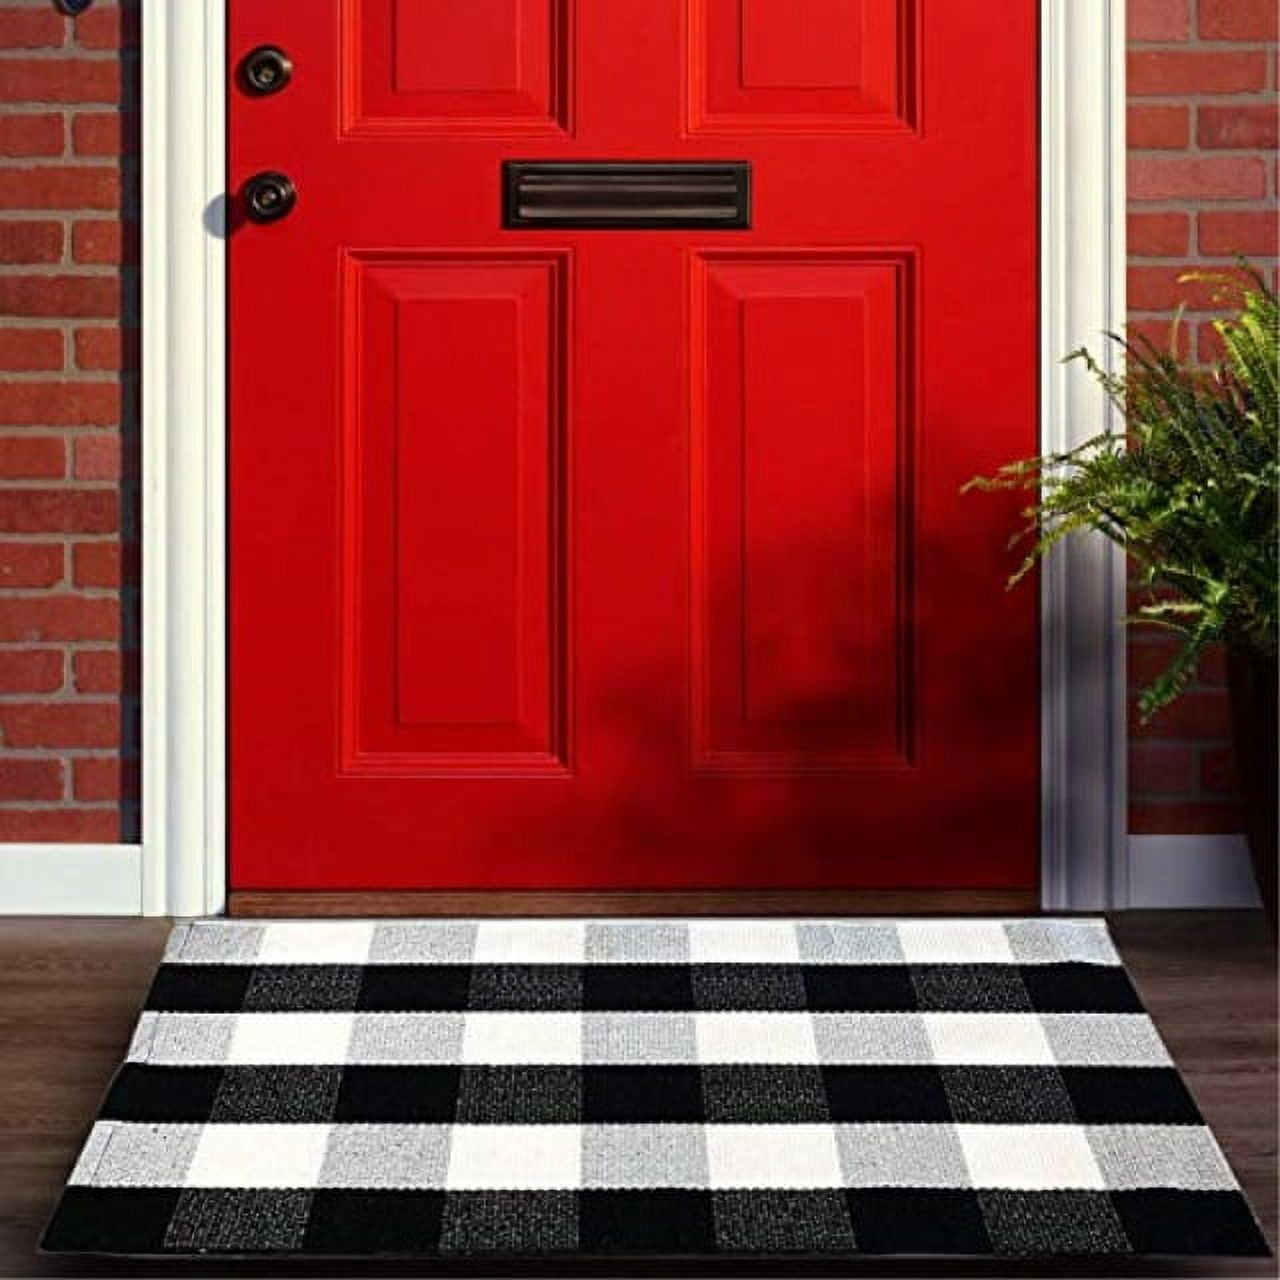 LBCASA Black White Plaid Indoor Door Mat - 16x24, Non-Slip Welcome Mat  for Patio, Gnomes Skate Geometric Space Abstract Art Front Door Rug for